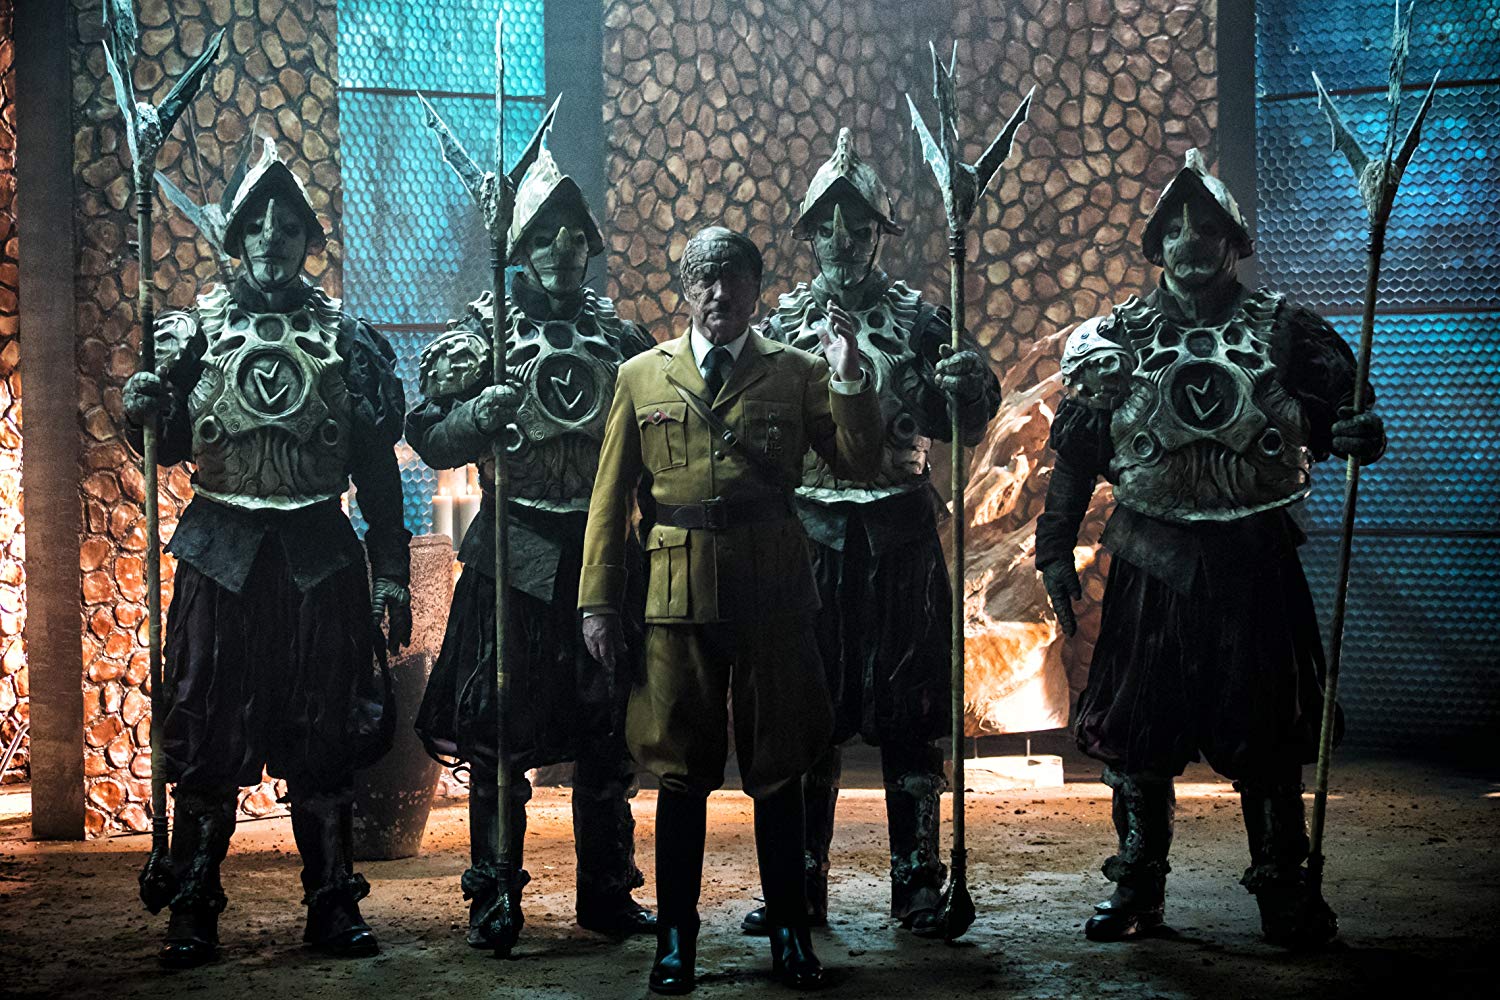 Watch Iron Sky: The Coming Race